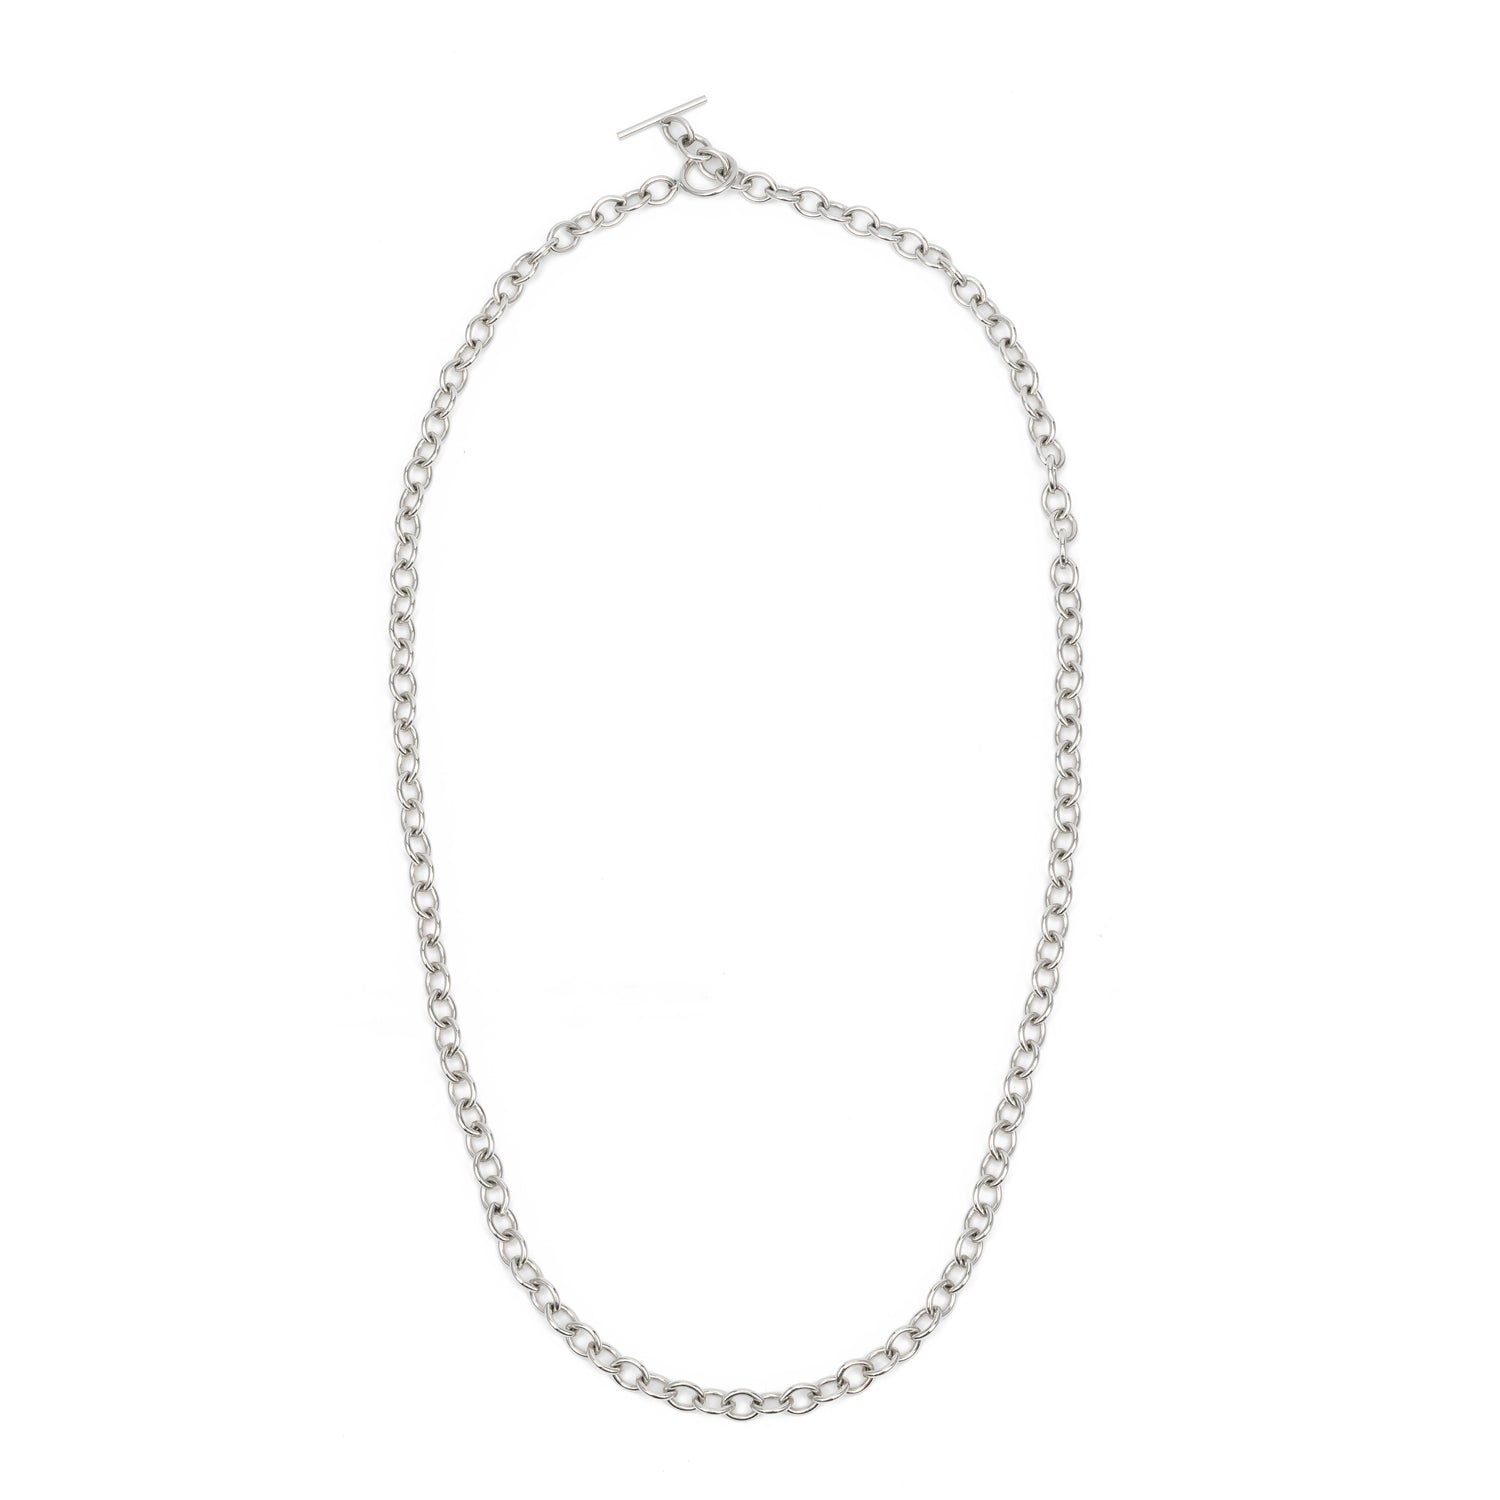 True Decadence chunky choker necklace in crystal silver | ASOS